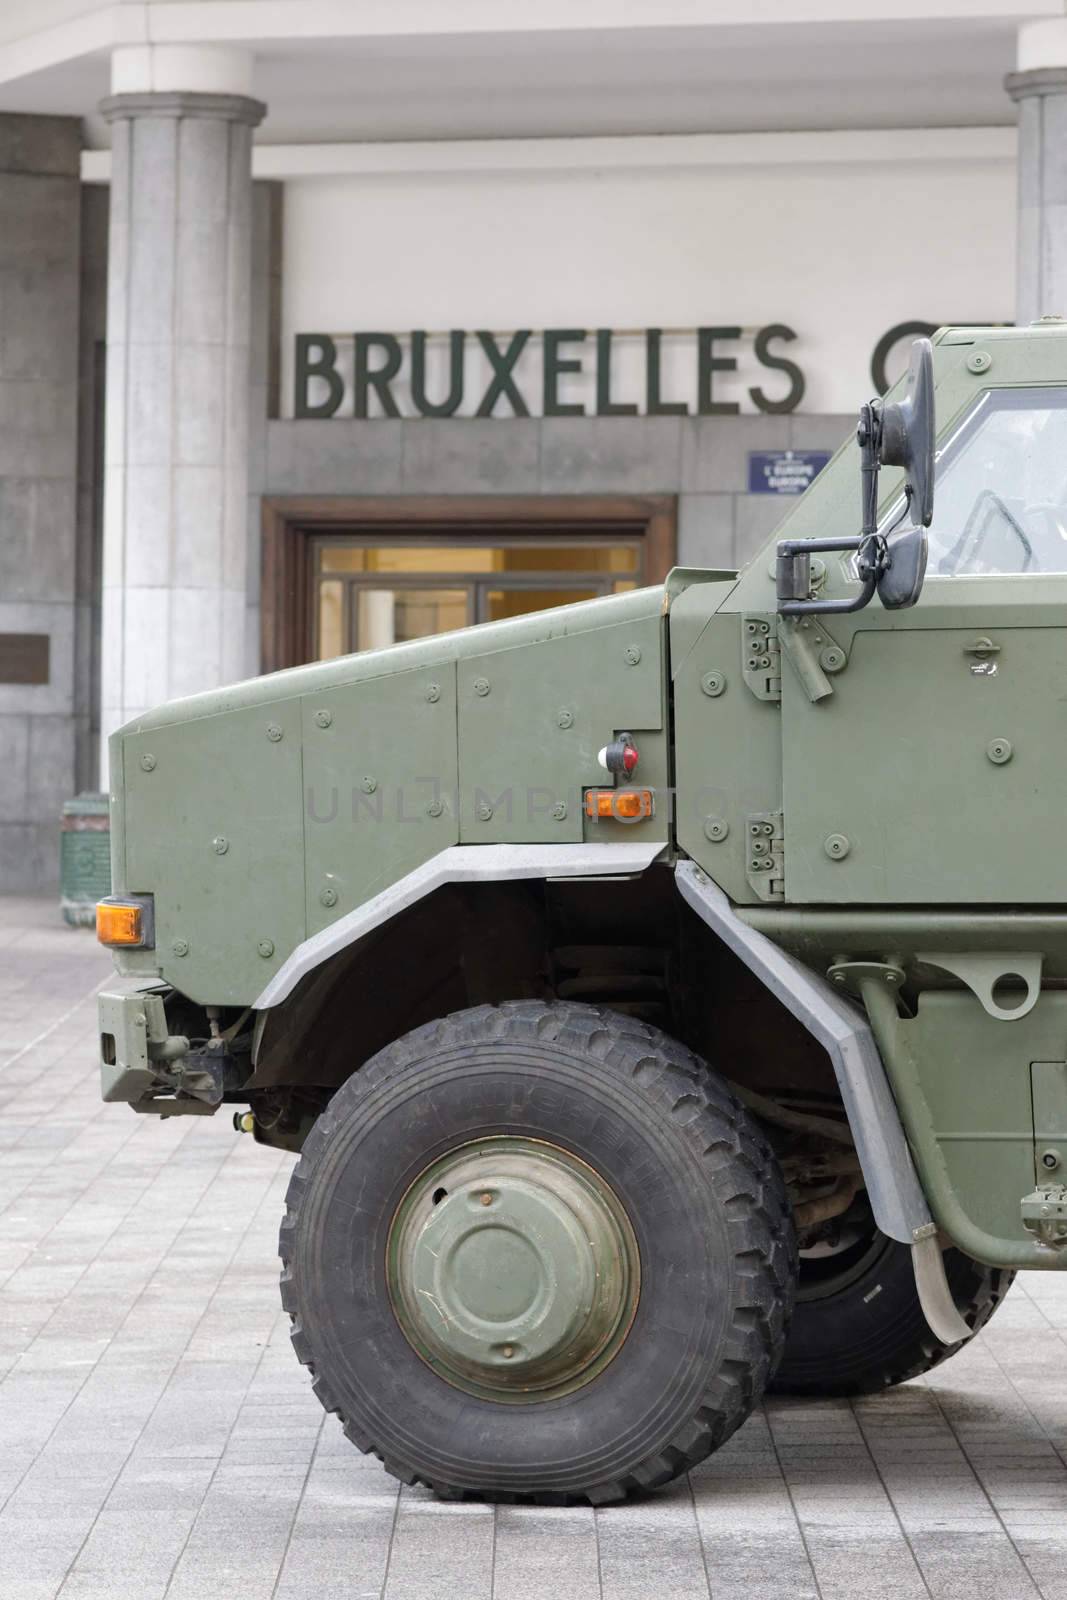 BELGIUM, Brussels: A Belgian military vehicle is seen in central Brussels, on November 22, 2015, after level four was set for Brussels based on a serious and imminent terror attacks threat. The city's subway system was closed and heavily armed police and soldiers patrolled the streets just over a week after more than 130 were killed in gun and bomb attacks in Paris. Many of the Paris attackers lived in Belgium, including one who is still at large.